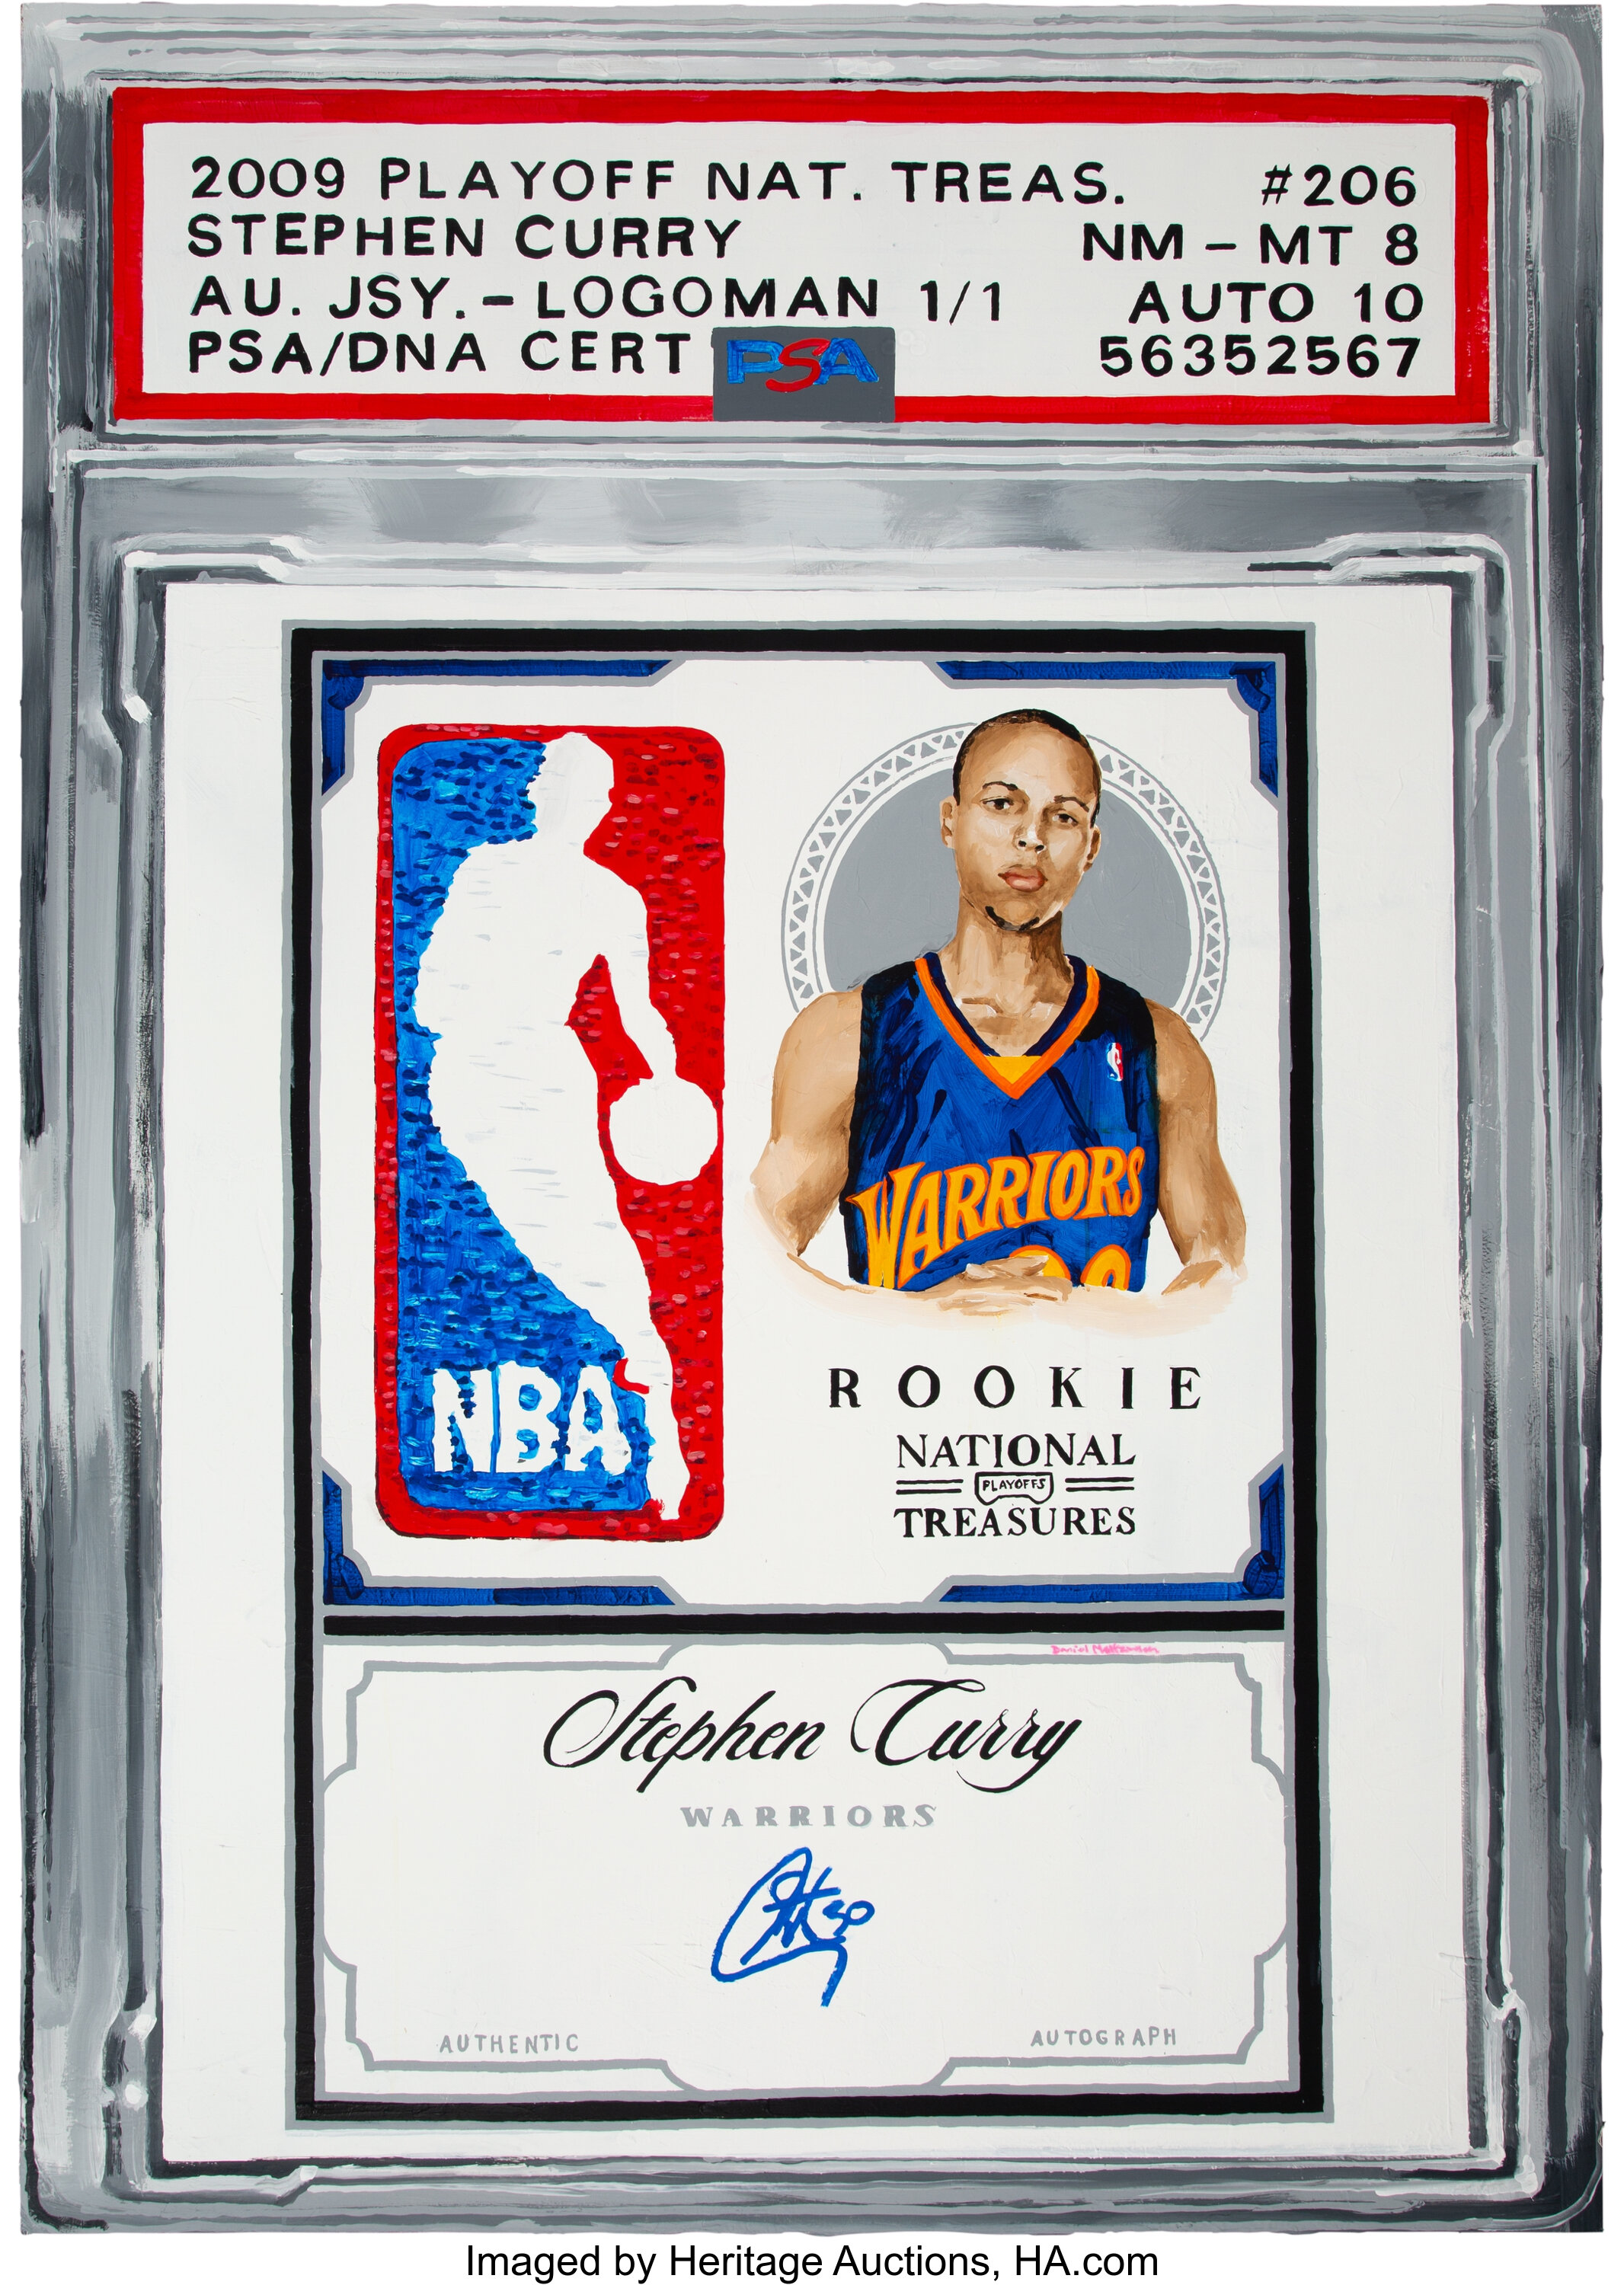 Stephen Curry signed jersey PSA/DNA Auto Grade 10 Autographed